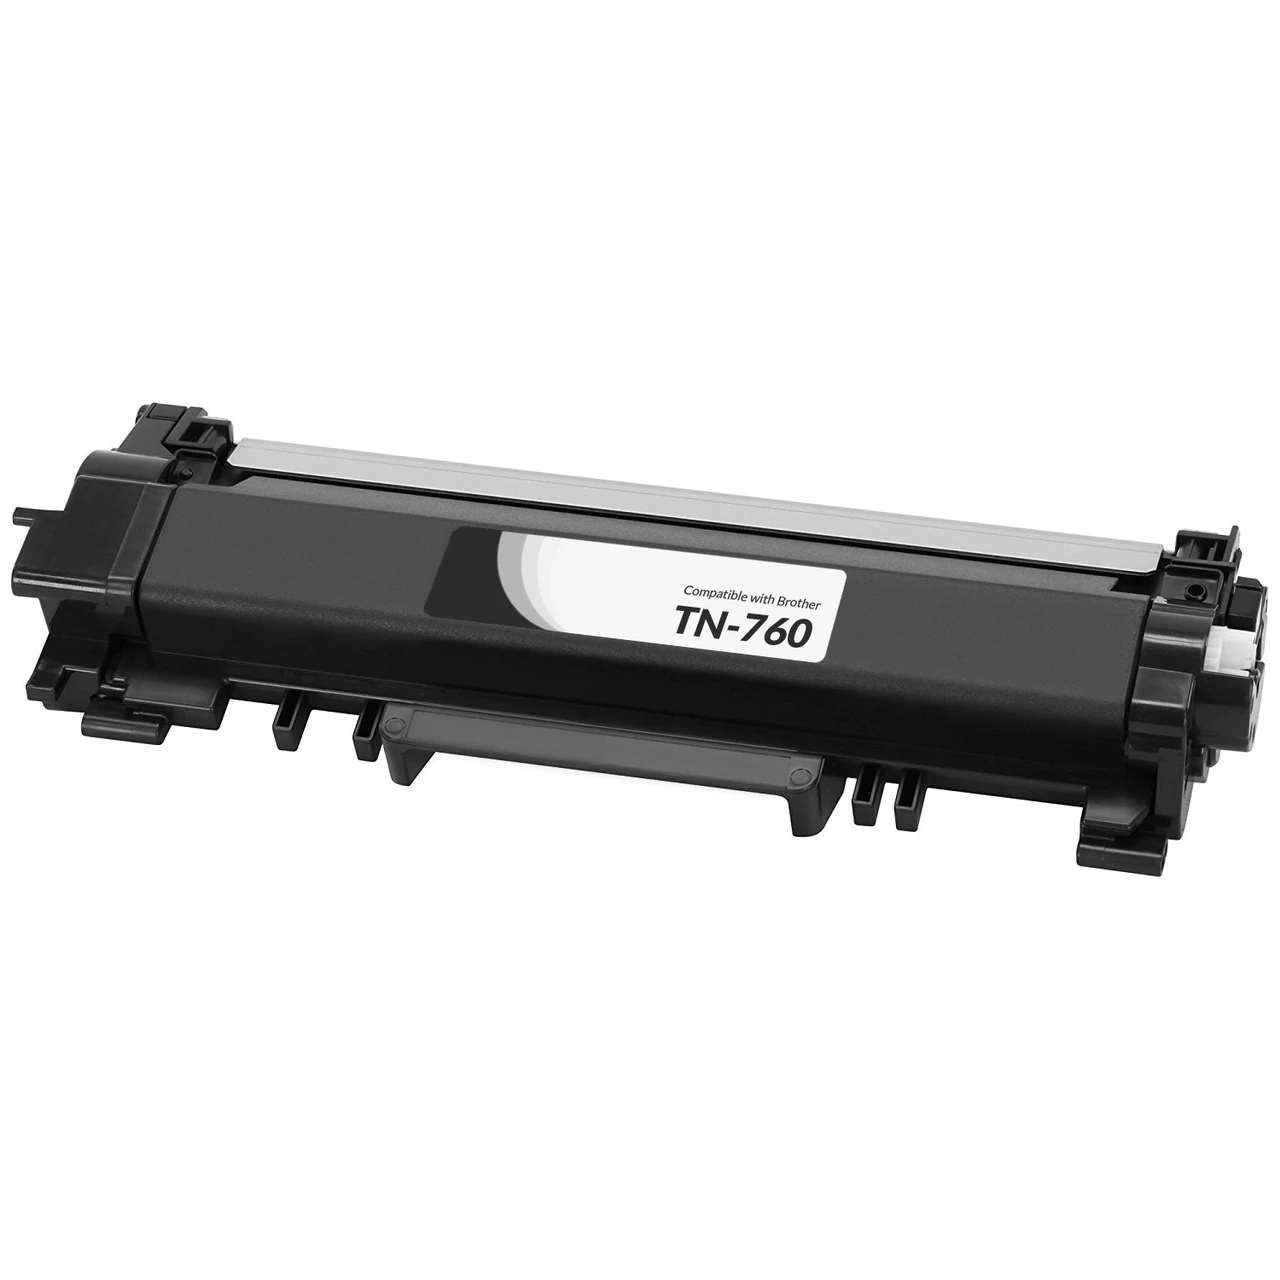 Brother TN760 Compatible Black Toner Cartridge, High Yield, 3,000 Page Yield - TON-TN760-CPT